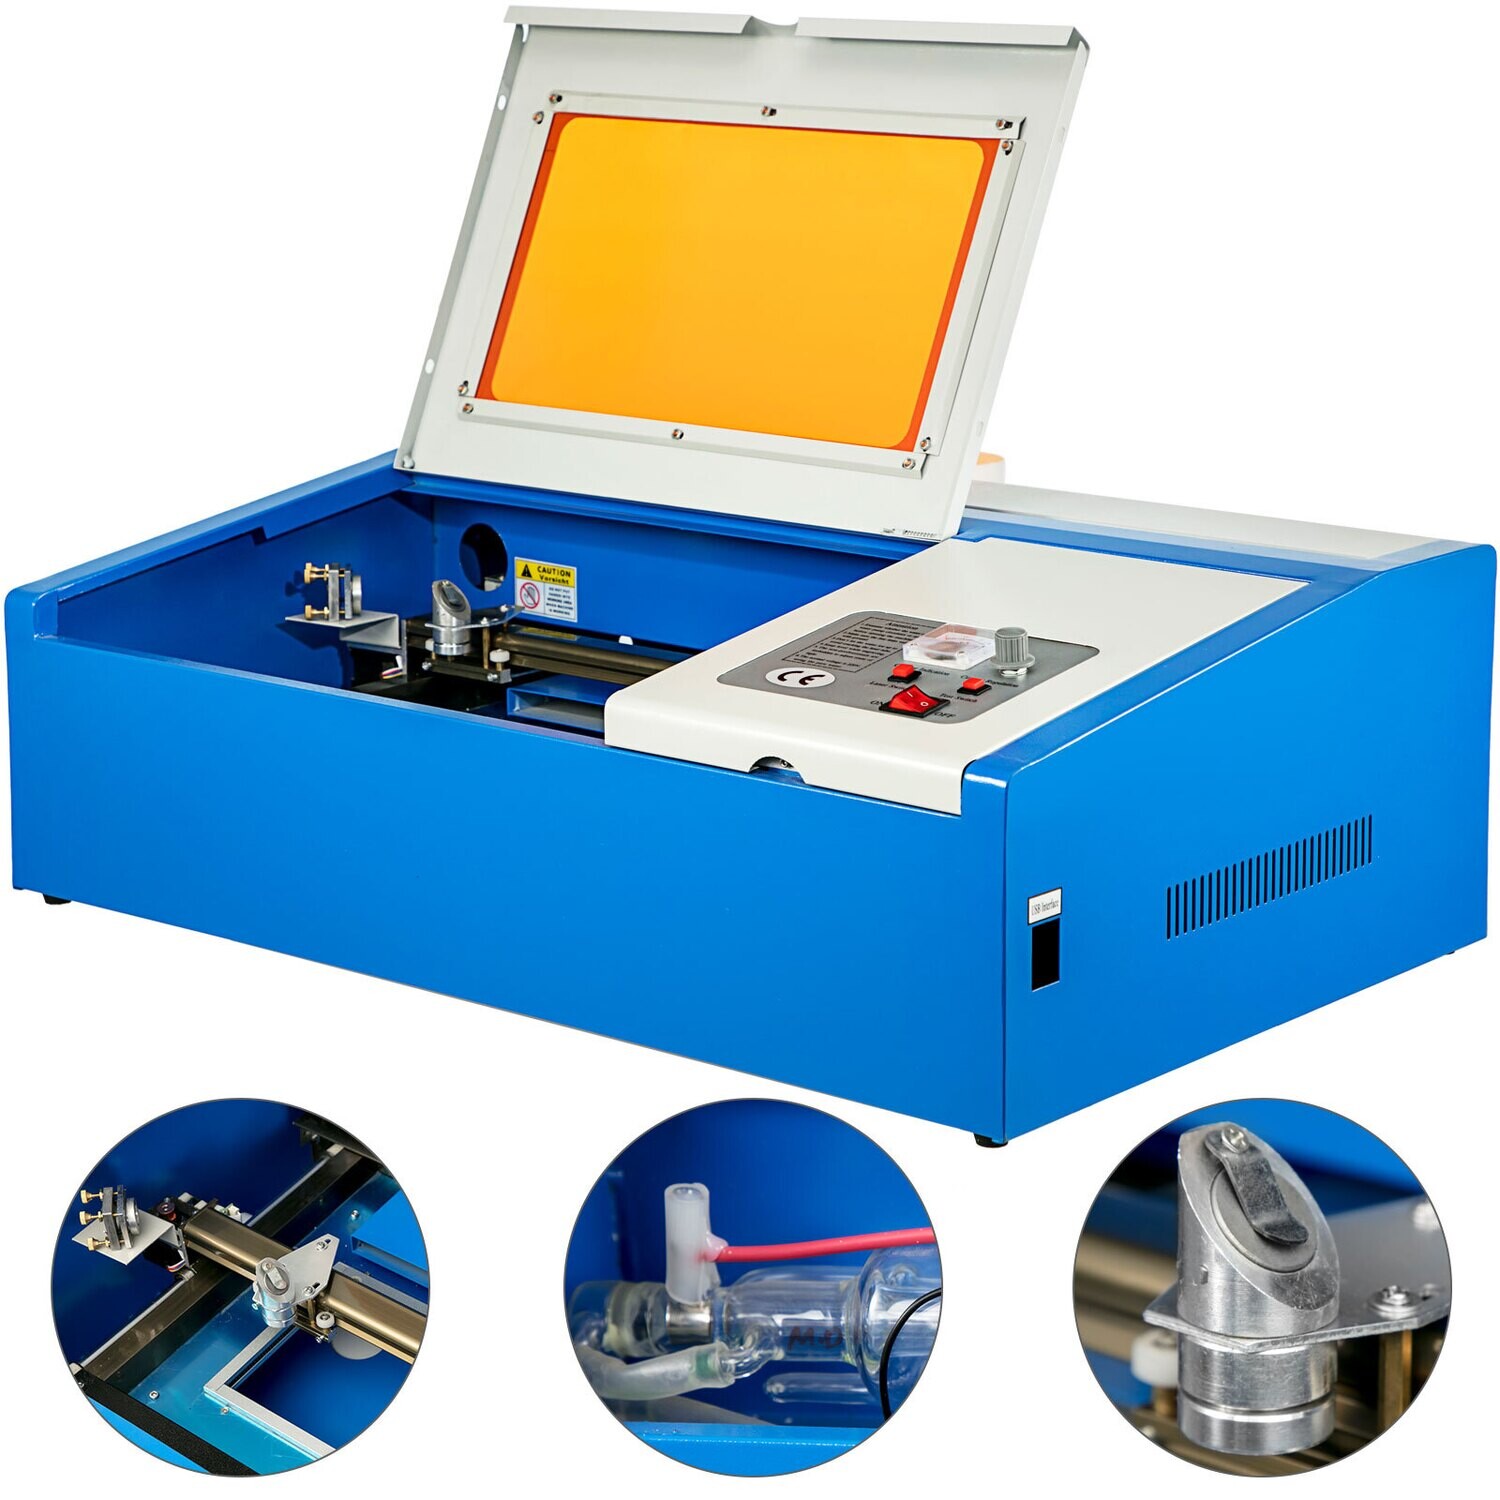 40w Laser Engraving Cutting Machine Updated Hig Speed with USB PORT [3rd Generation]